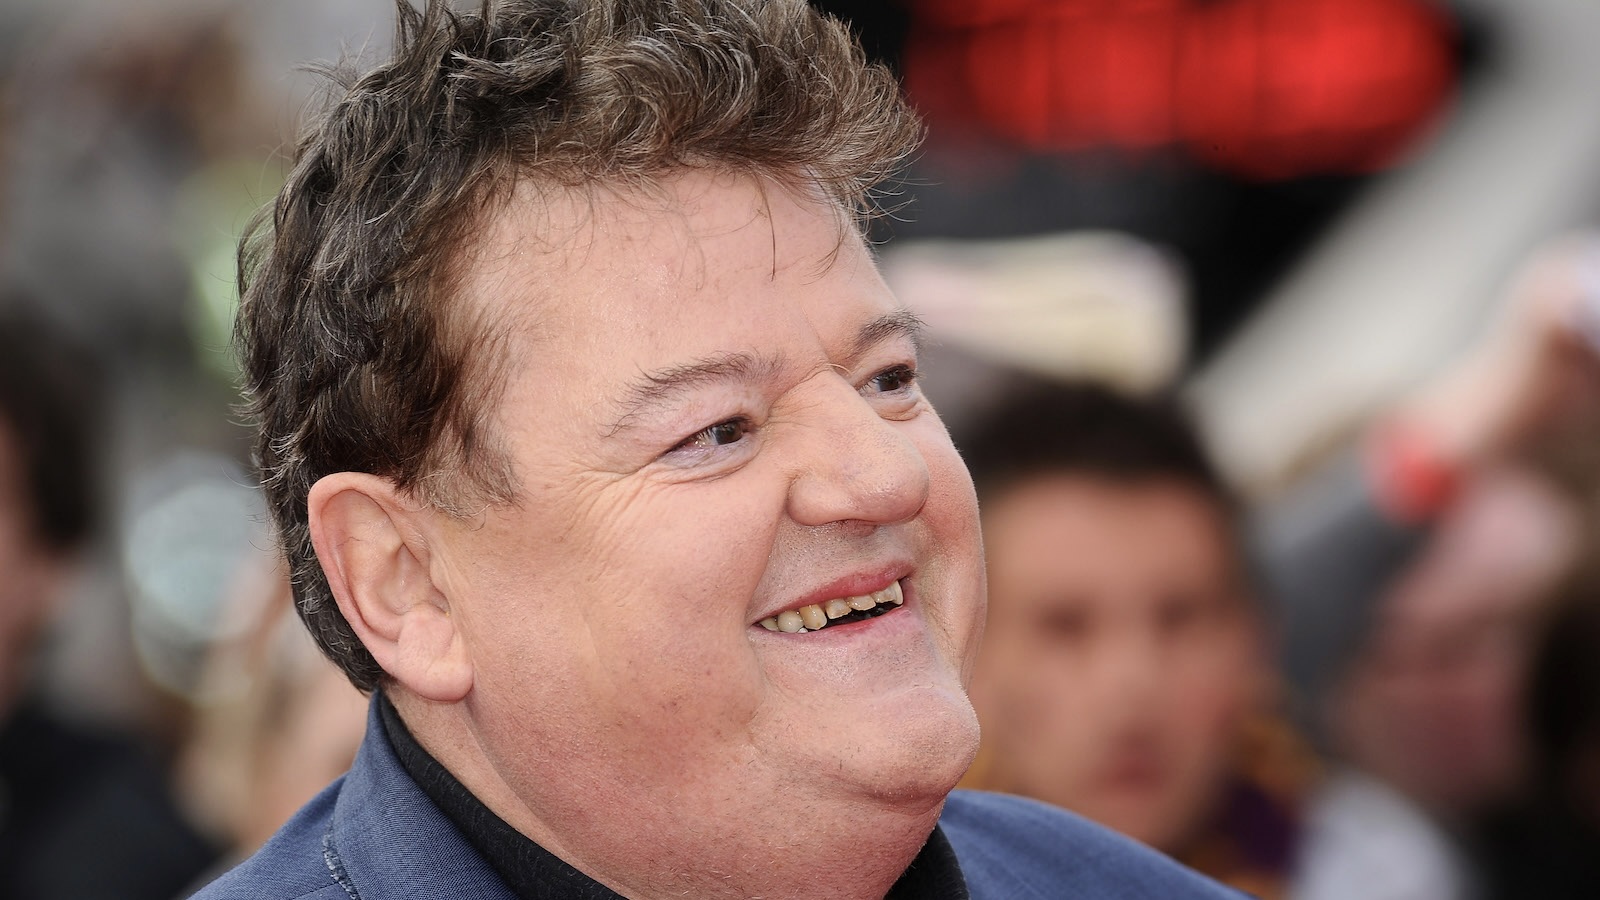 Robbie Coltrane’s Potter Co-stars and Friends Pay Tribute to His Passing